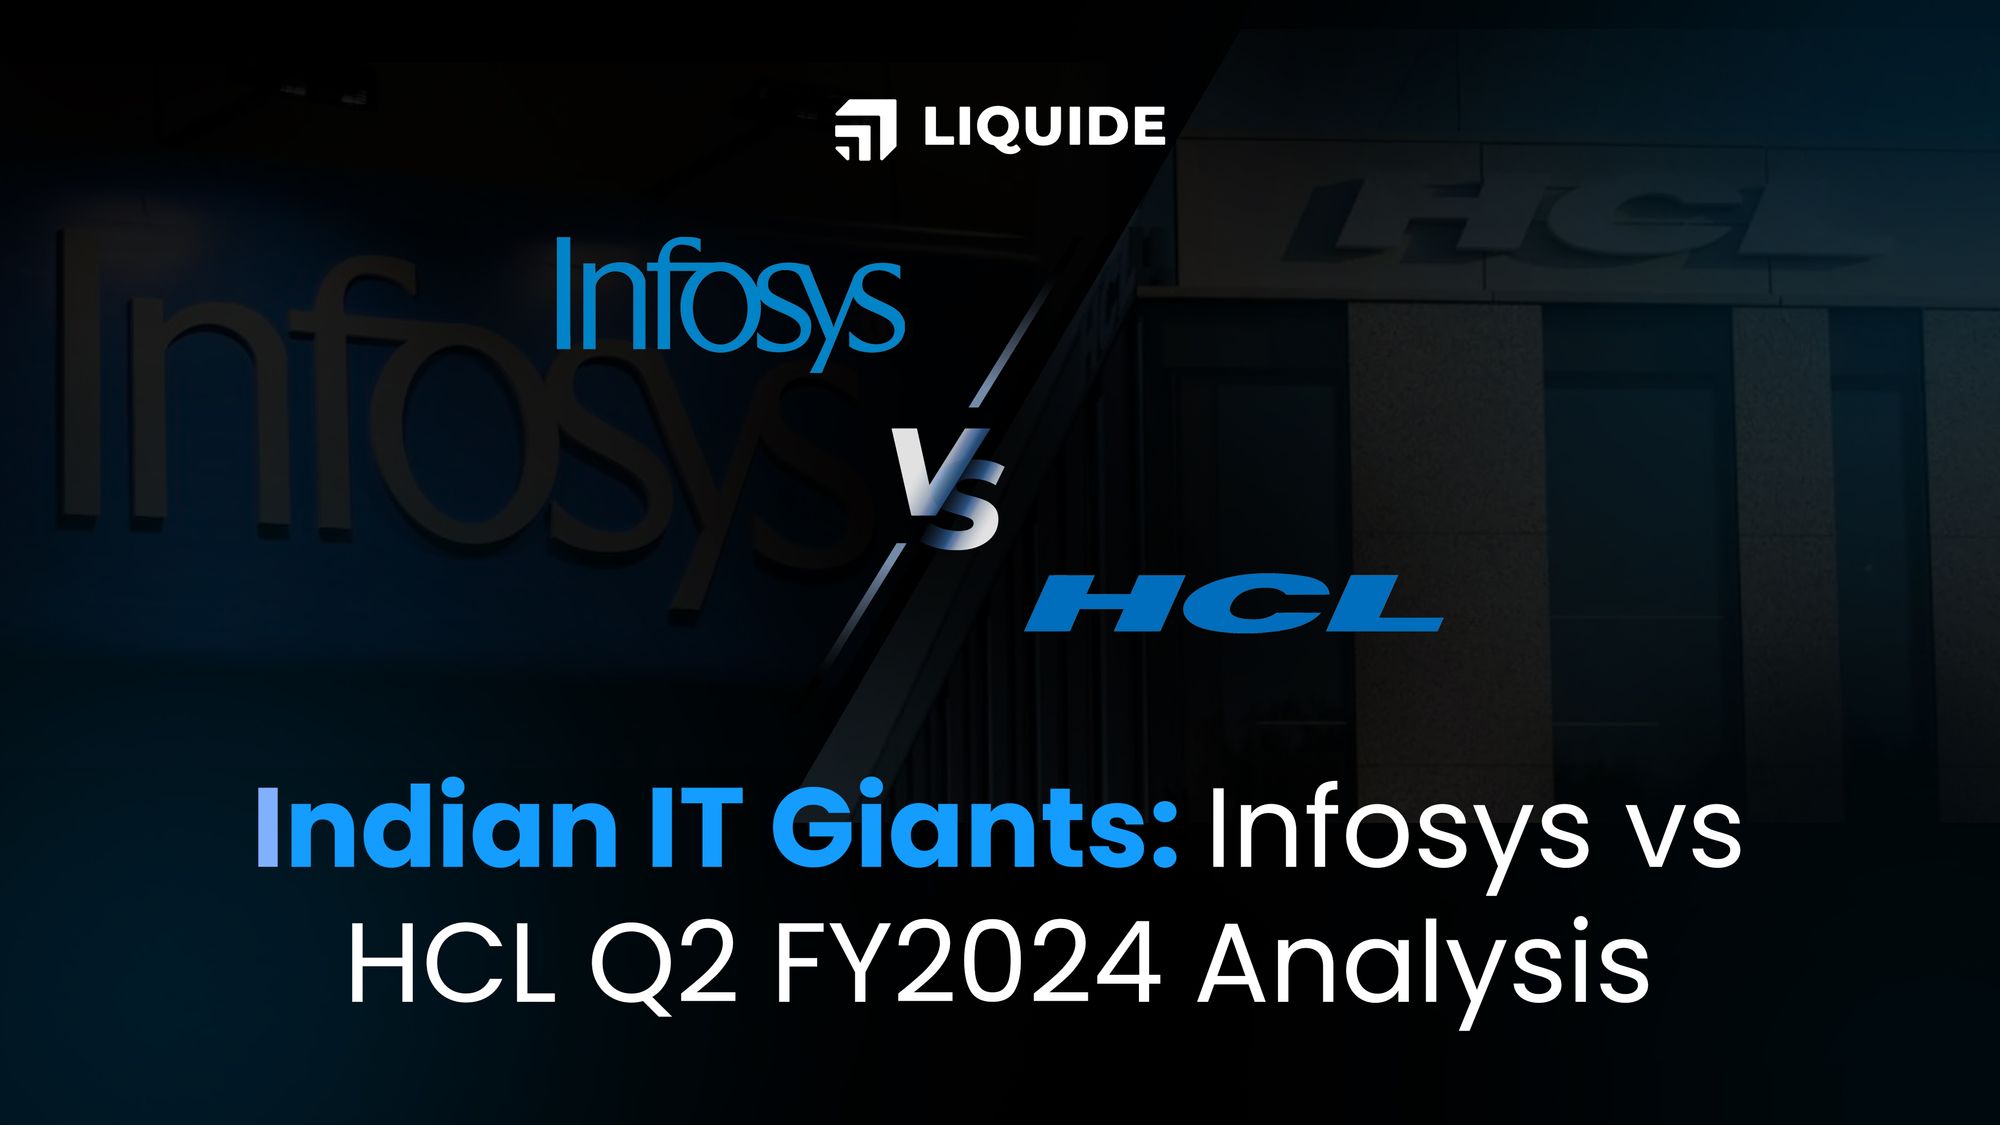 Infosys vs HCL Q2 FY2024 Results Liquide